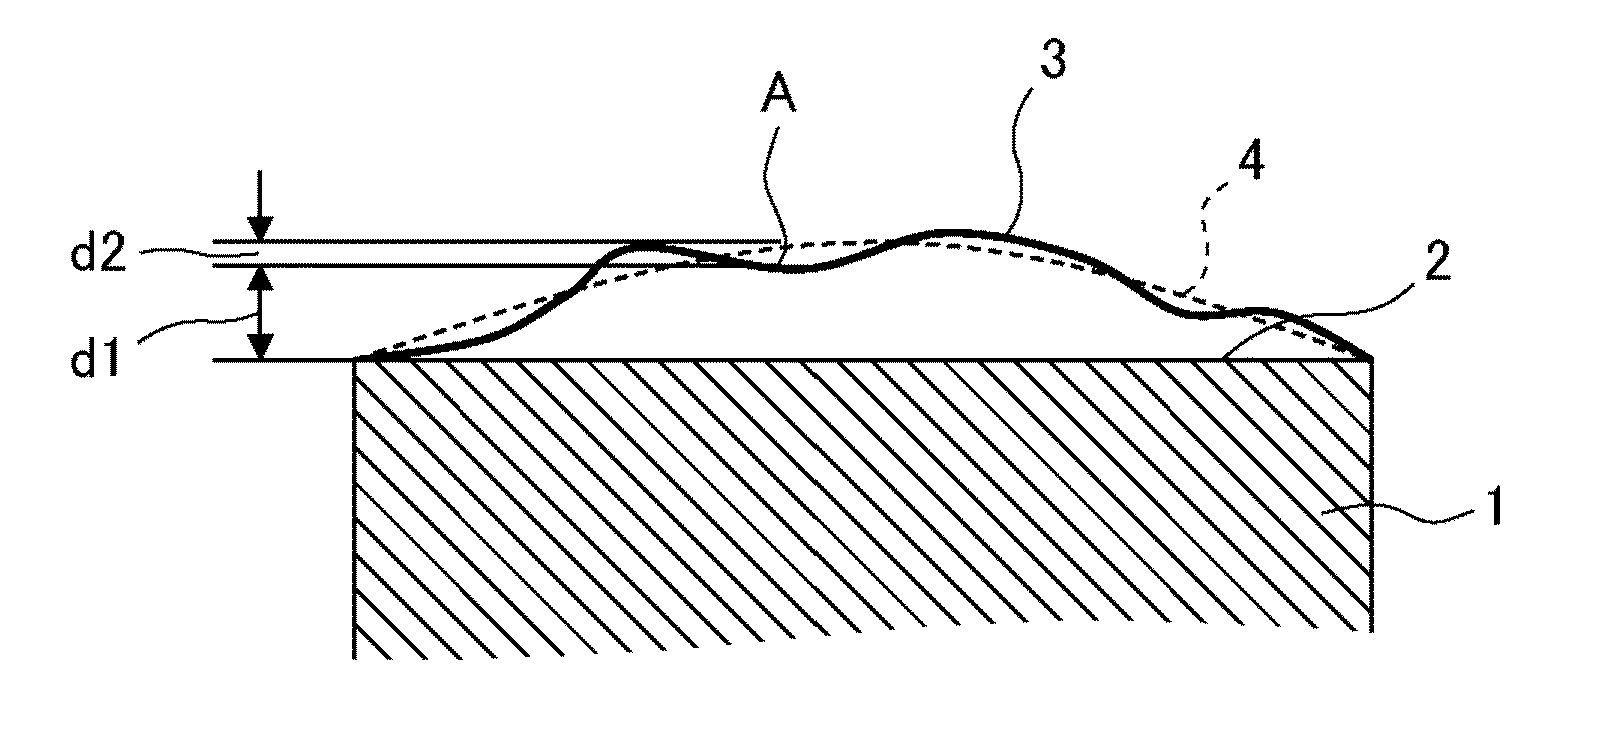 Mask blank substrate, mask blank, transfer mask, and method of manufacturing semiconductor device